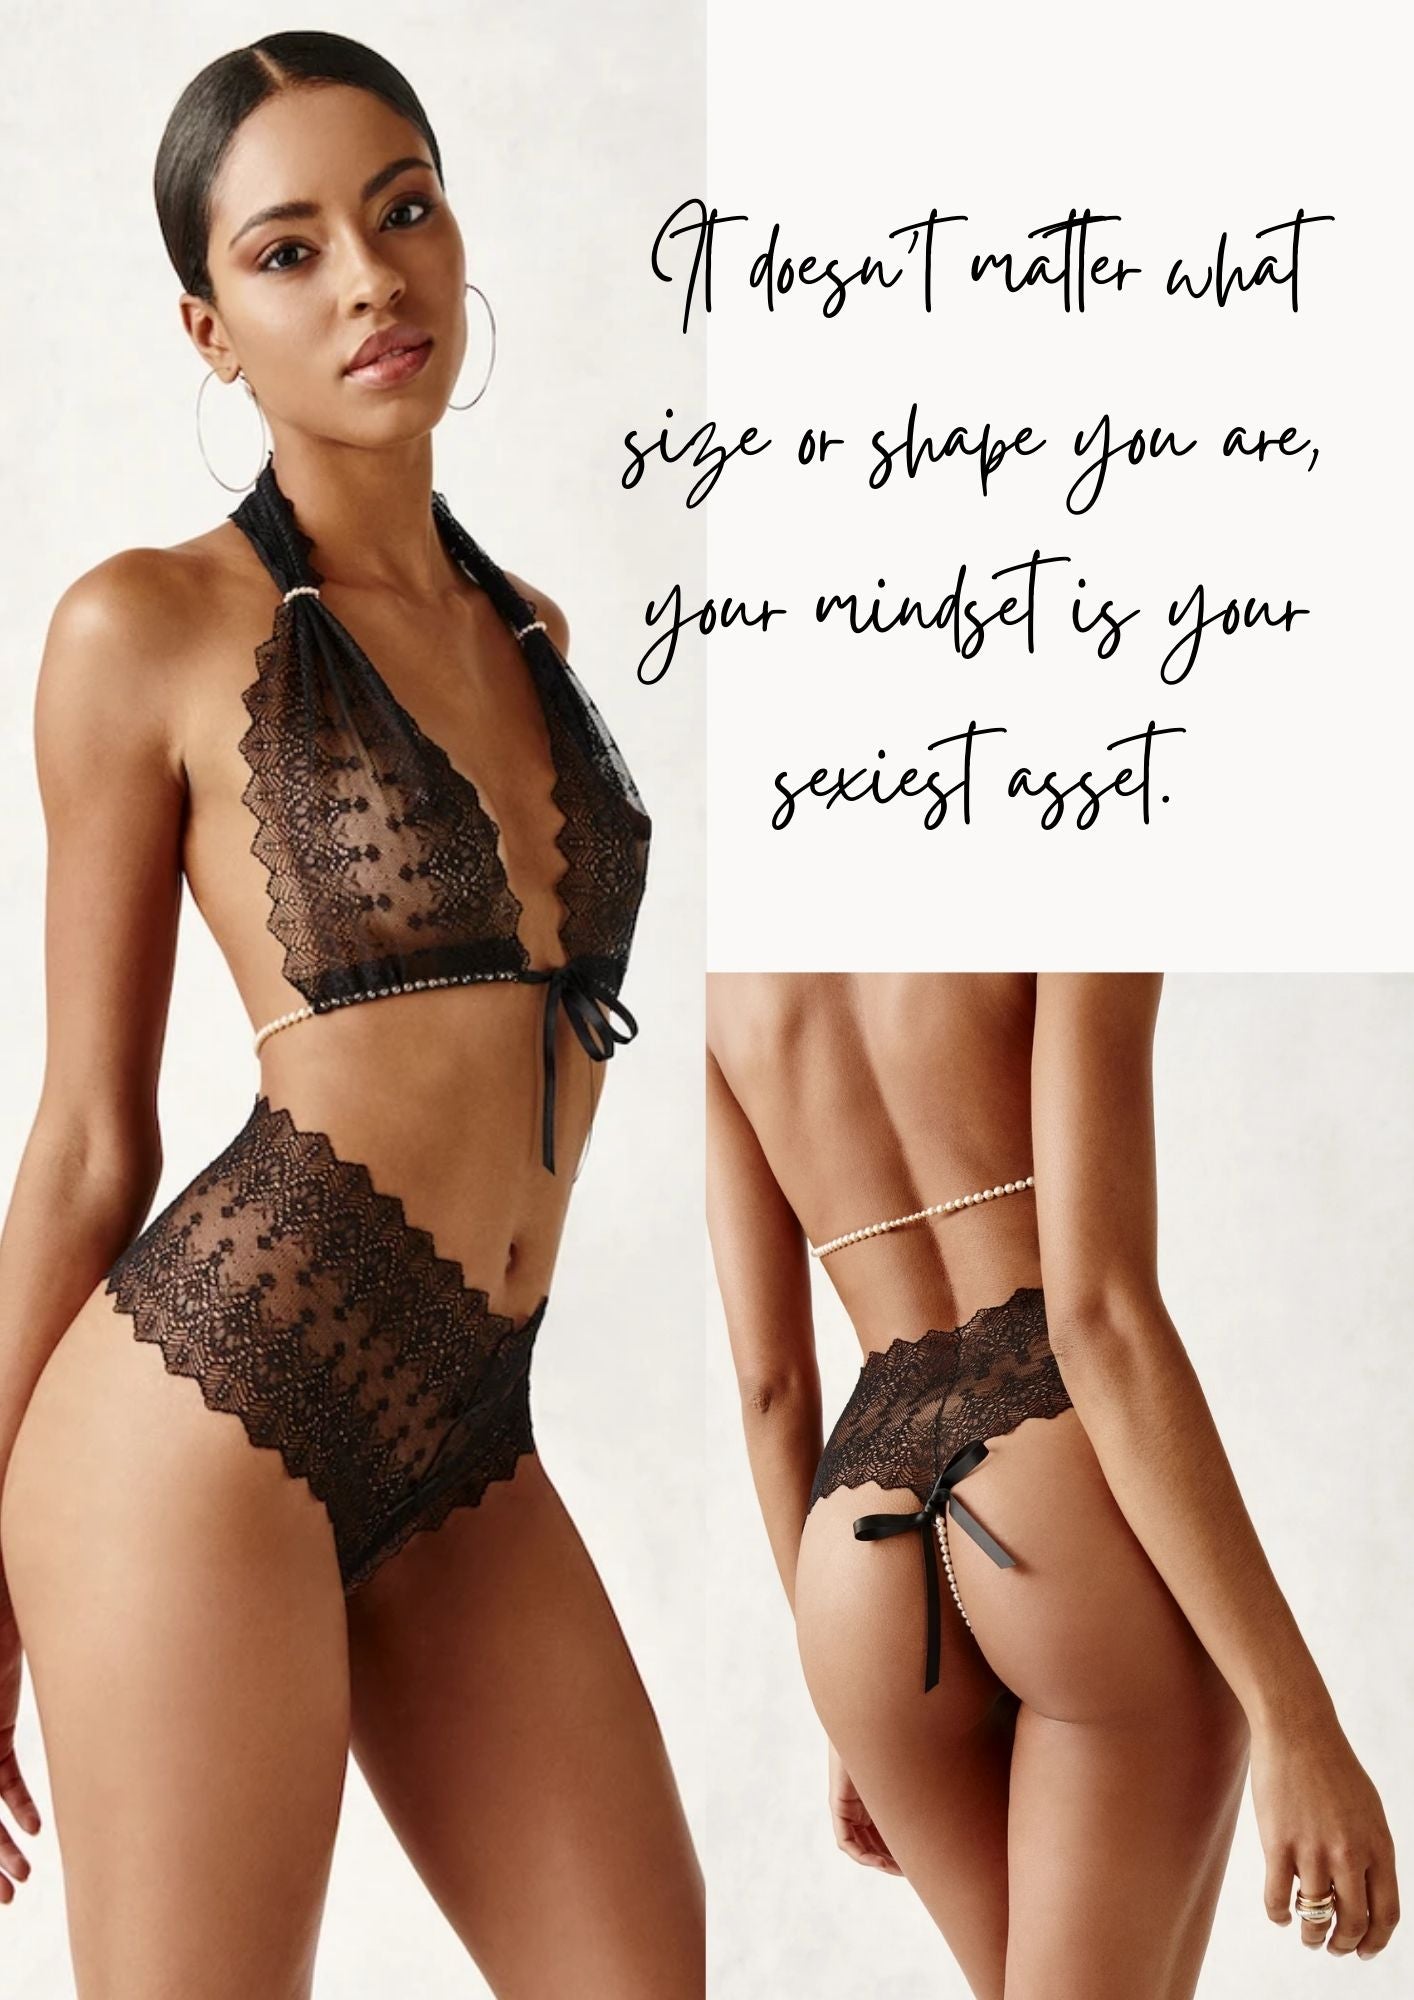 How to be confident in bed with lingerie by Olivia Tripp